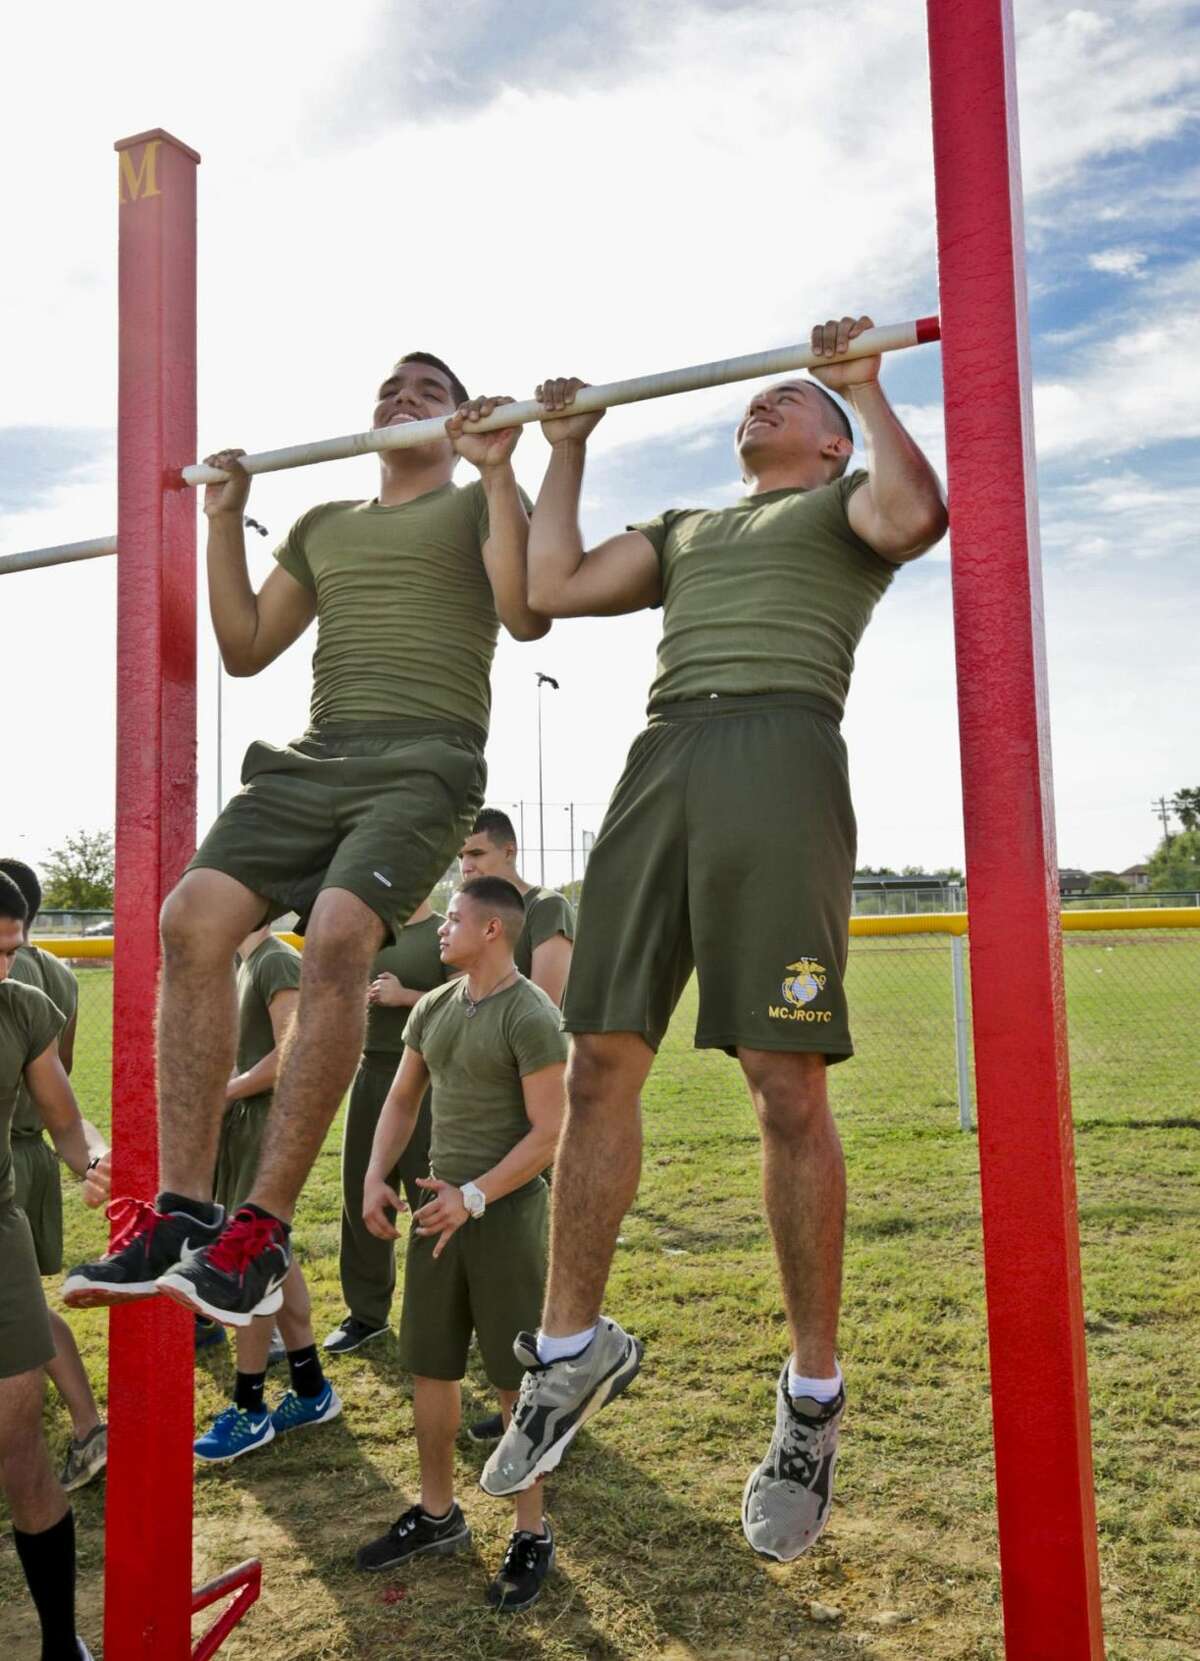 United South High School Marine Corp JROTC members Aaron Sanchez and Luis Gutierrez perform a set of pull-up exercises, Monday morning, at the newly installed pull-up bars at Independence Hills Regional Park. The equipment was donated by Laredo Law Enforcement Marines as they celebrated the 239th Marine Corp founding anniversary. (Photo by Victor Strife/LMT)